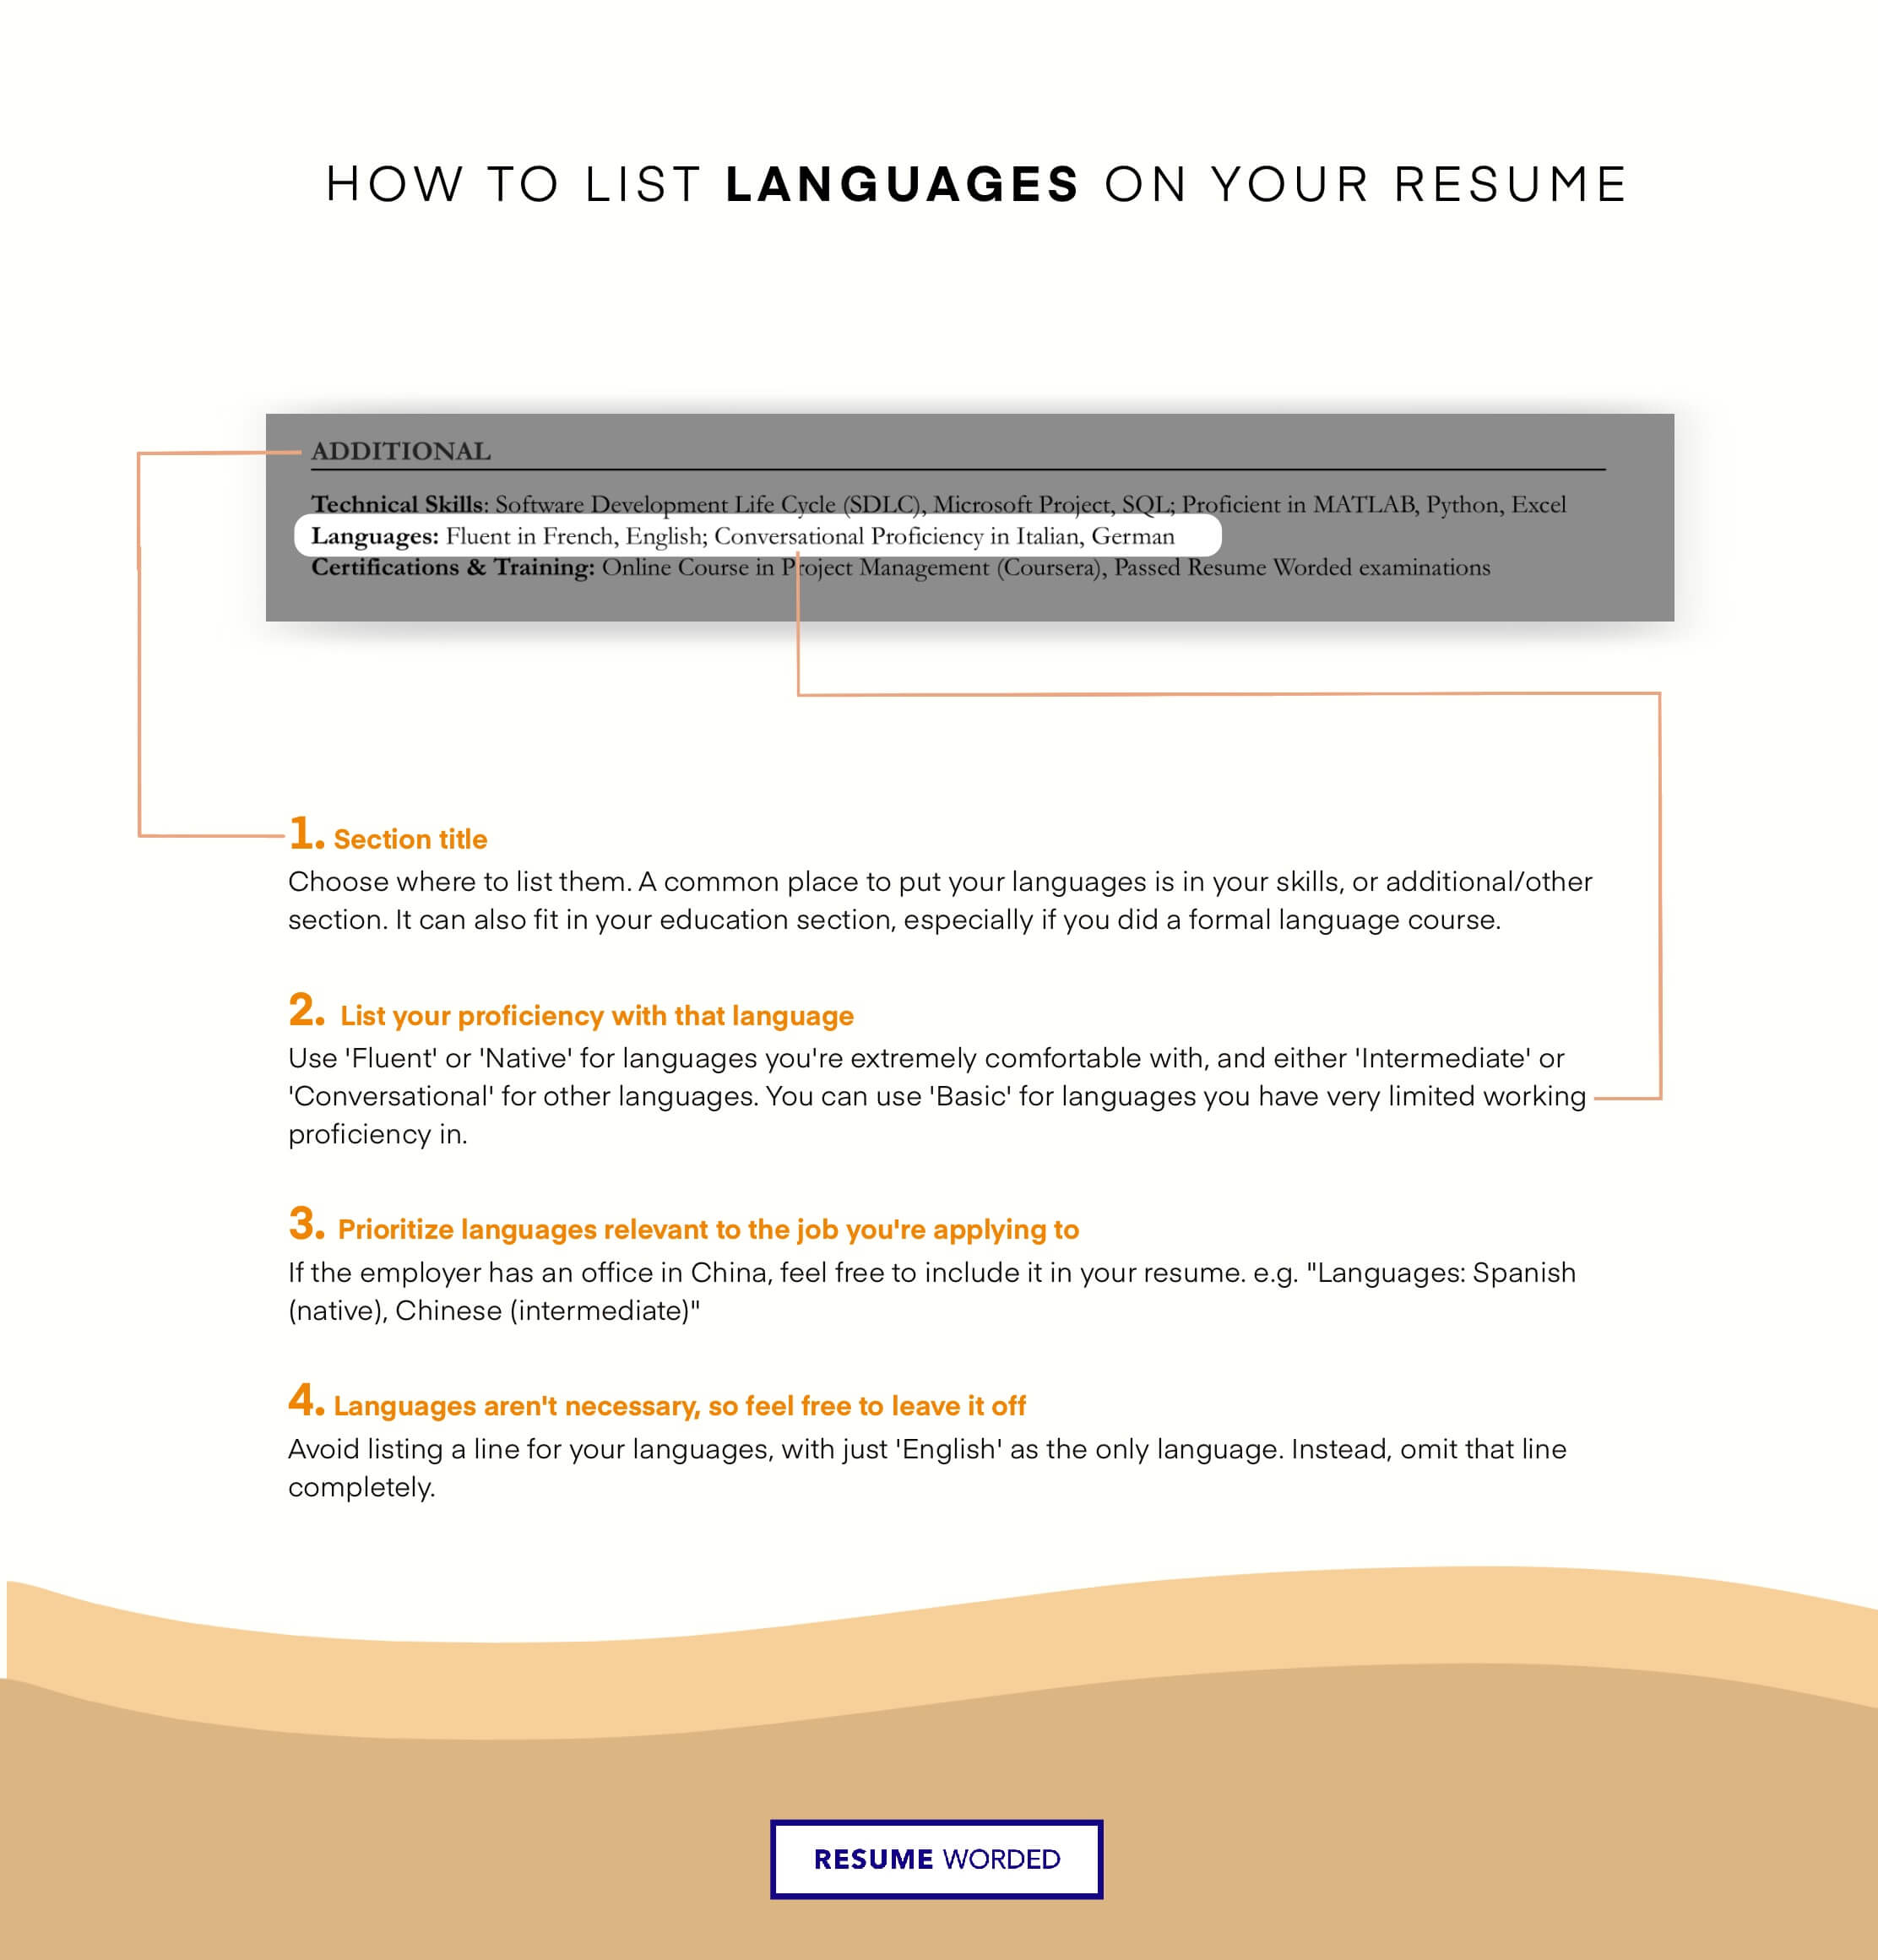 Use risk analyst language in your resume. - Risk Analyst Resume